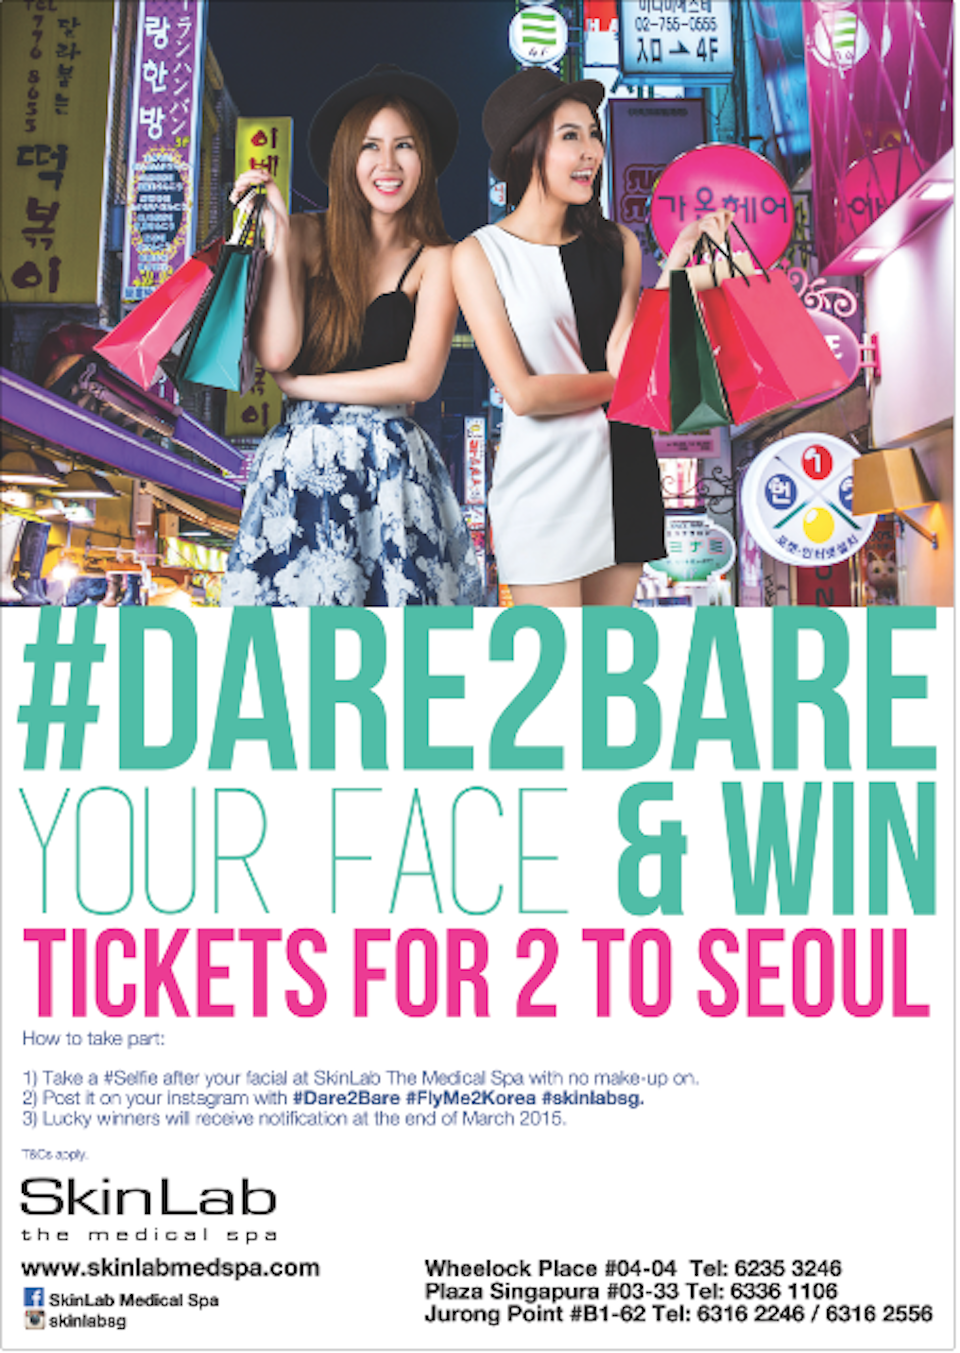 Bare It To Win A Trip For 2 To Korea – SkinLab The Medical Spa